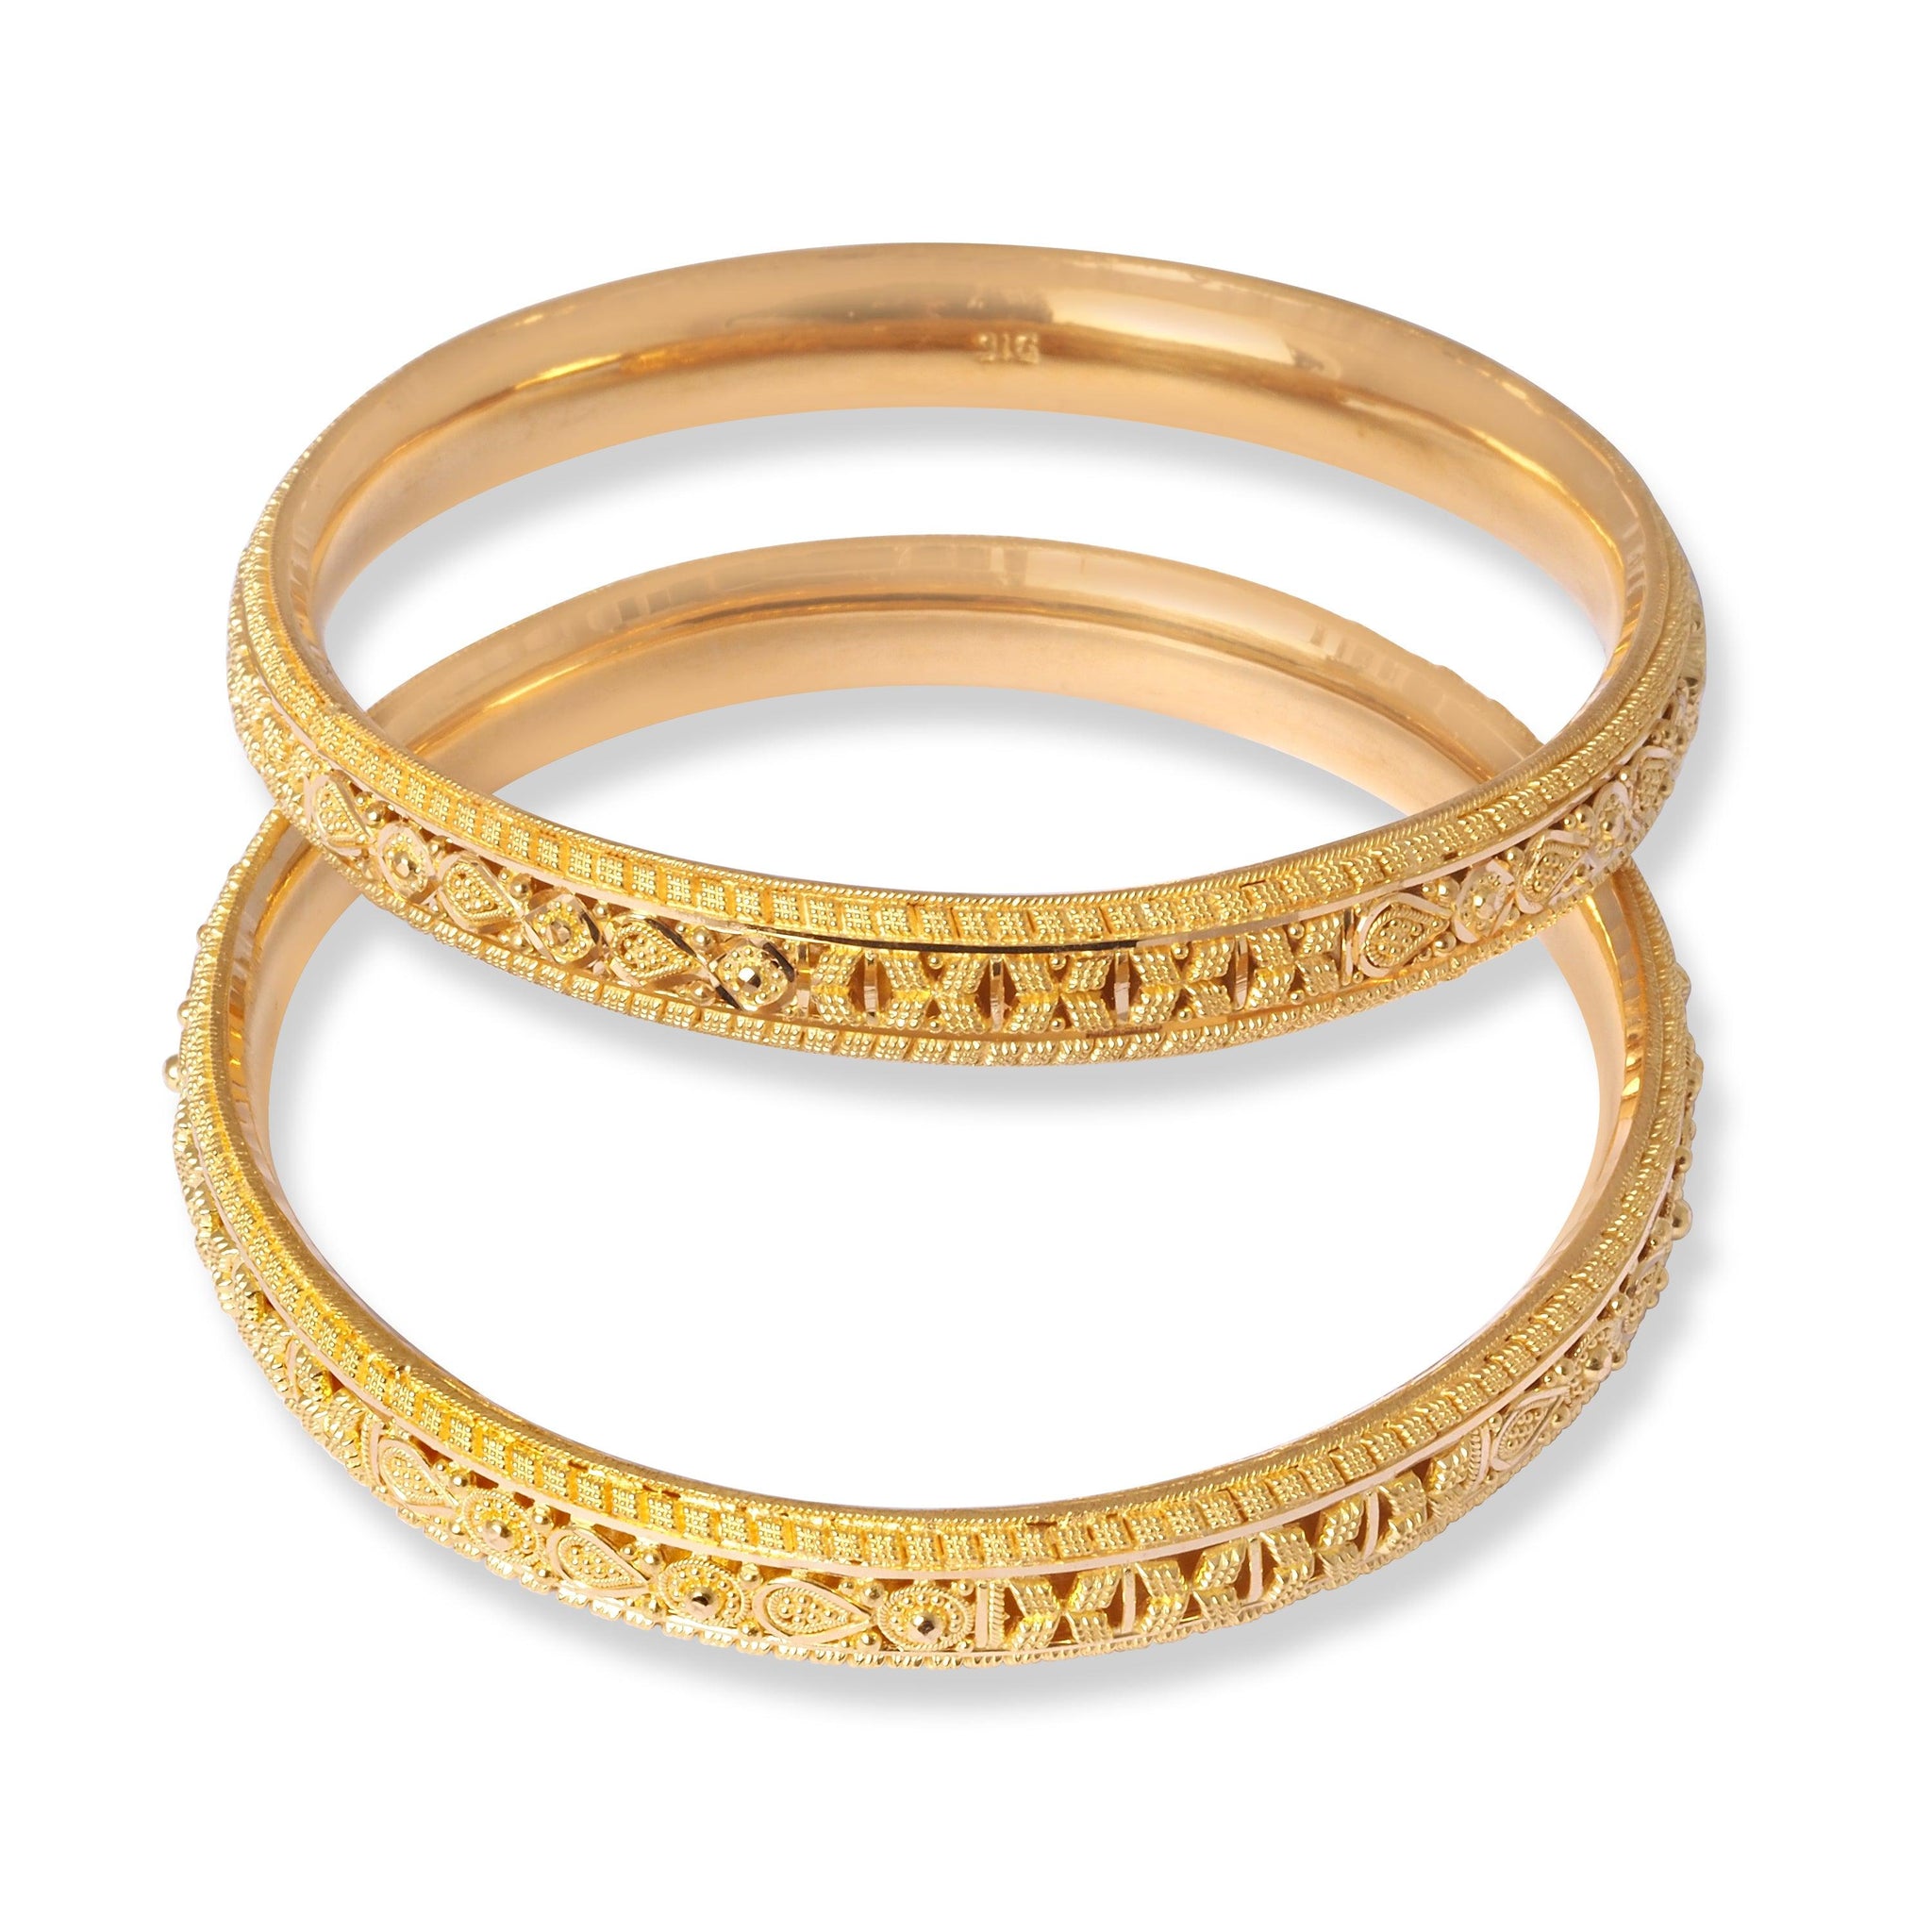 22ct Gold Pair of Bangles with Filigree Work B-8555